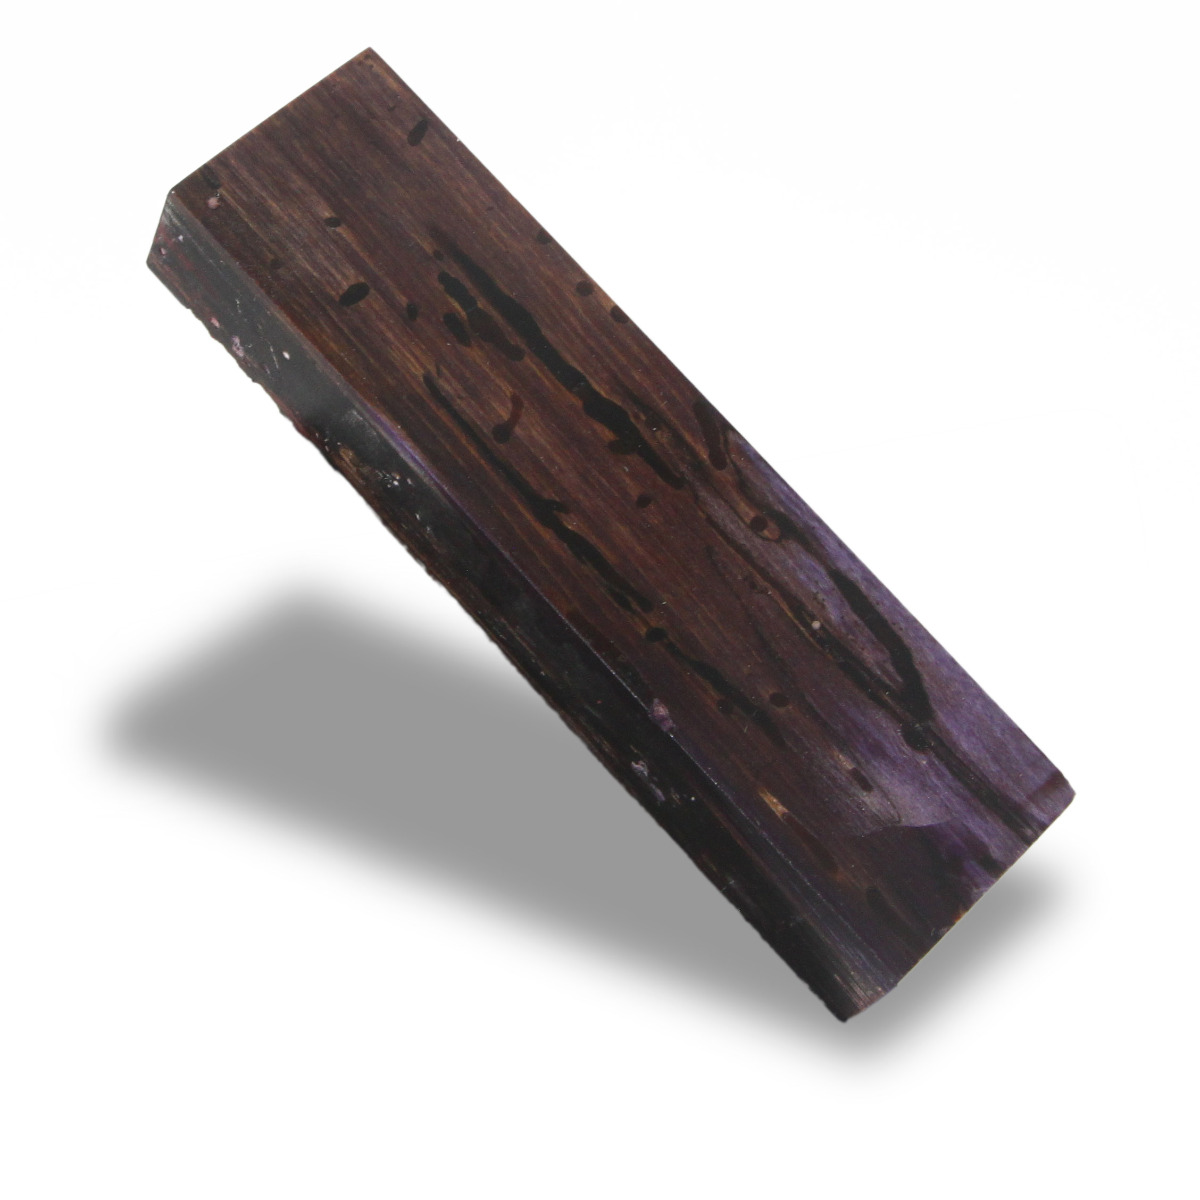 Spalted Maple Black Line Burl Knife Block - Dyed - #4032 - 1.5"x 0.8"x 5.4"